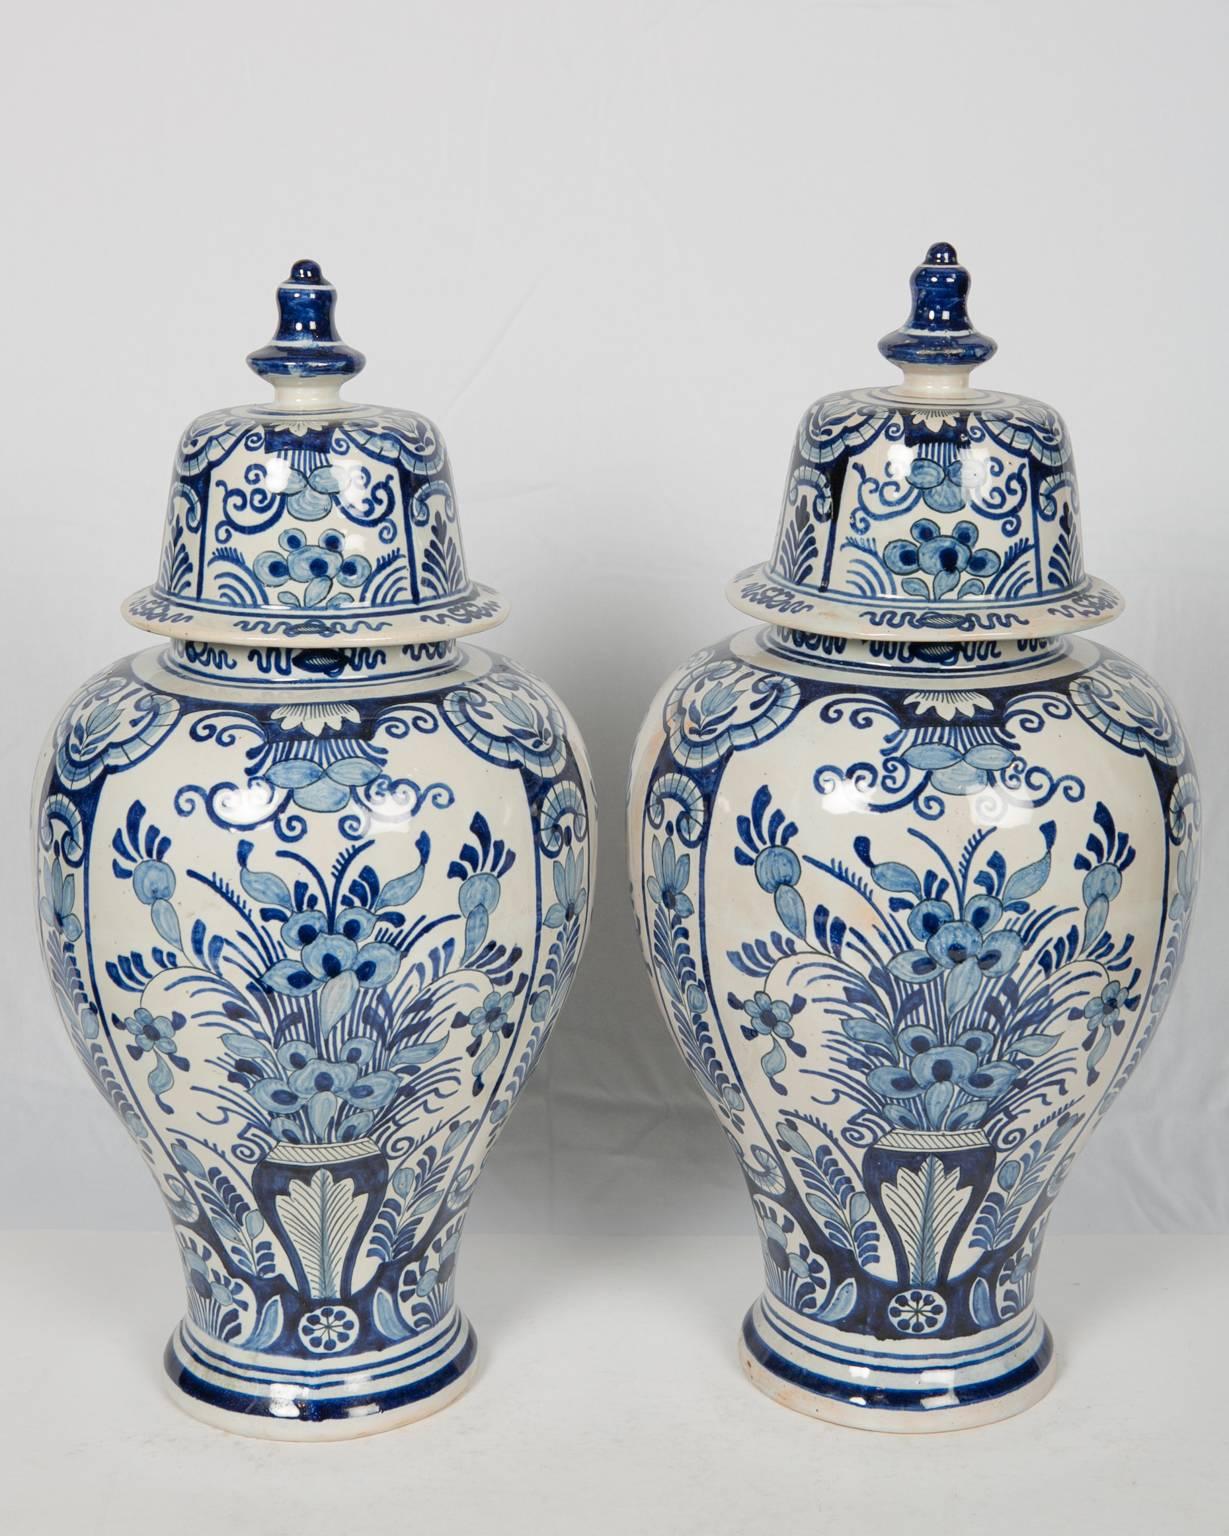 A pair of Dutch delft blue and white ginger jars decorated with panels showing a vase overflowing with flowers. The variety of contrasting blues from light to dark cobalt is what makes this elegant pair of vases so wonderful. The covers are